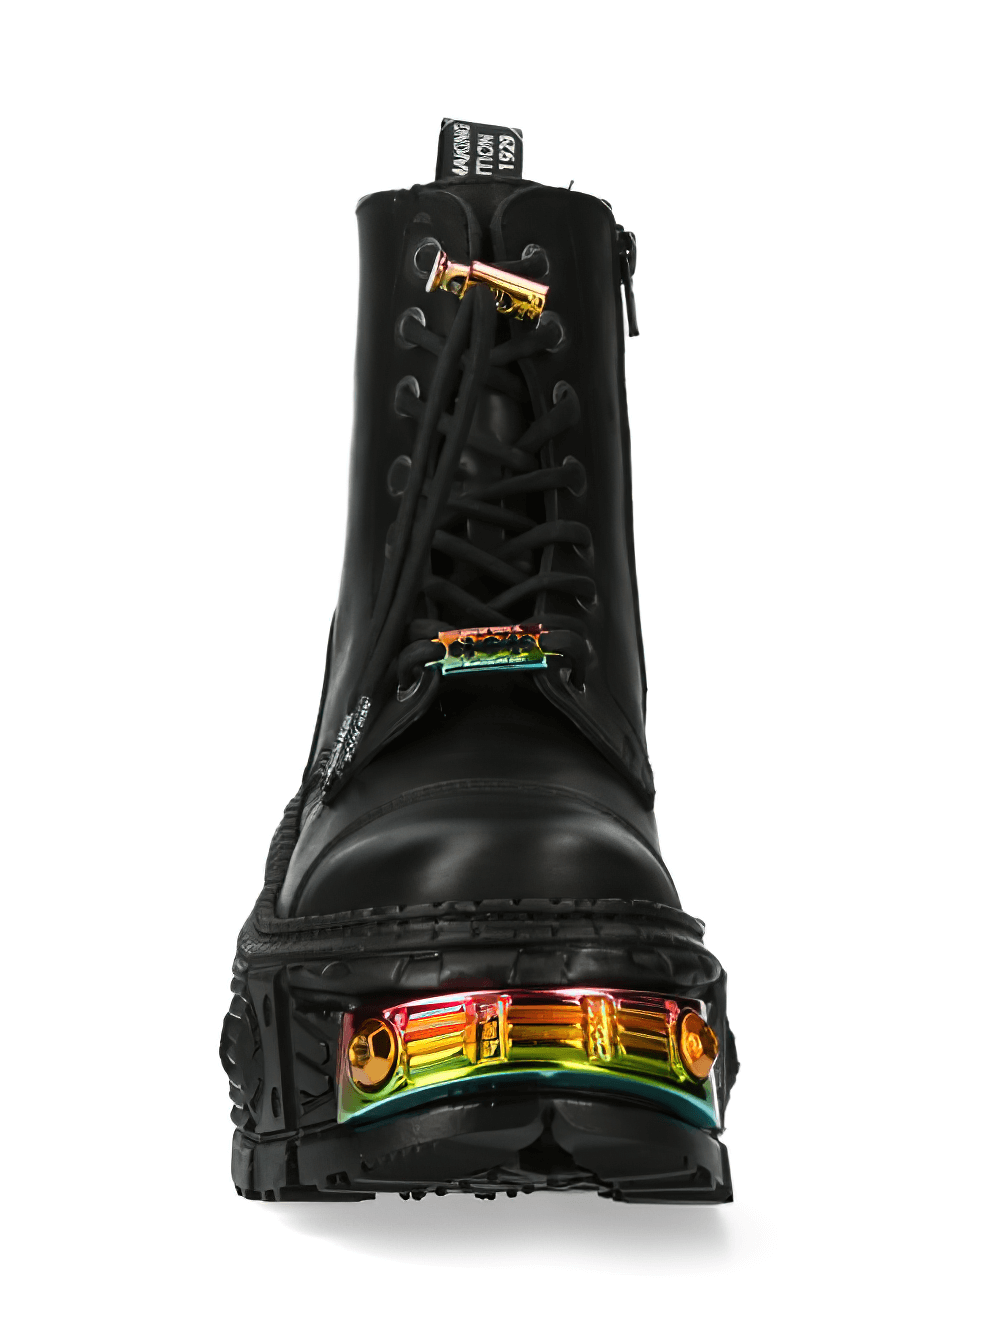 NEW ROCK Black Military Ankle Boots with Color Details